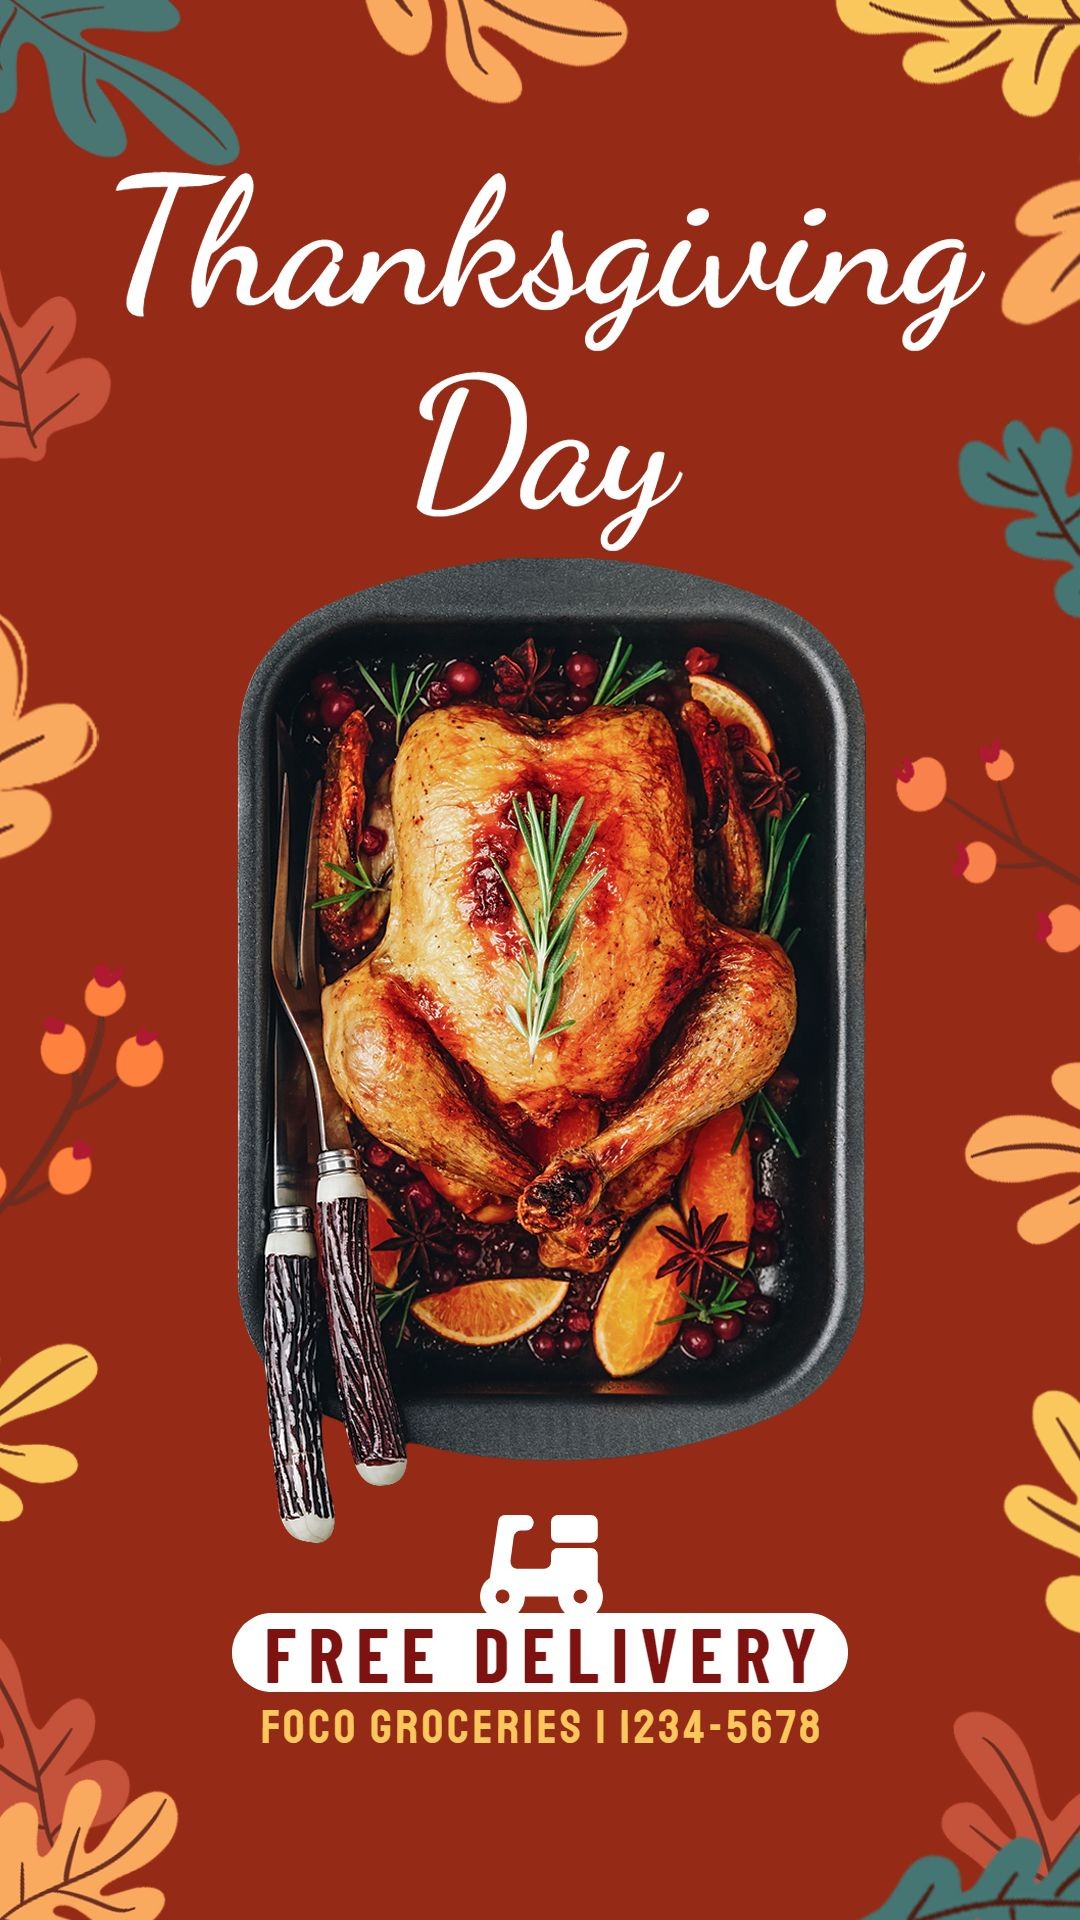 Thanksgiving Delicacy Delivery Promotion Ecommerce Story预览效果